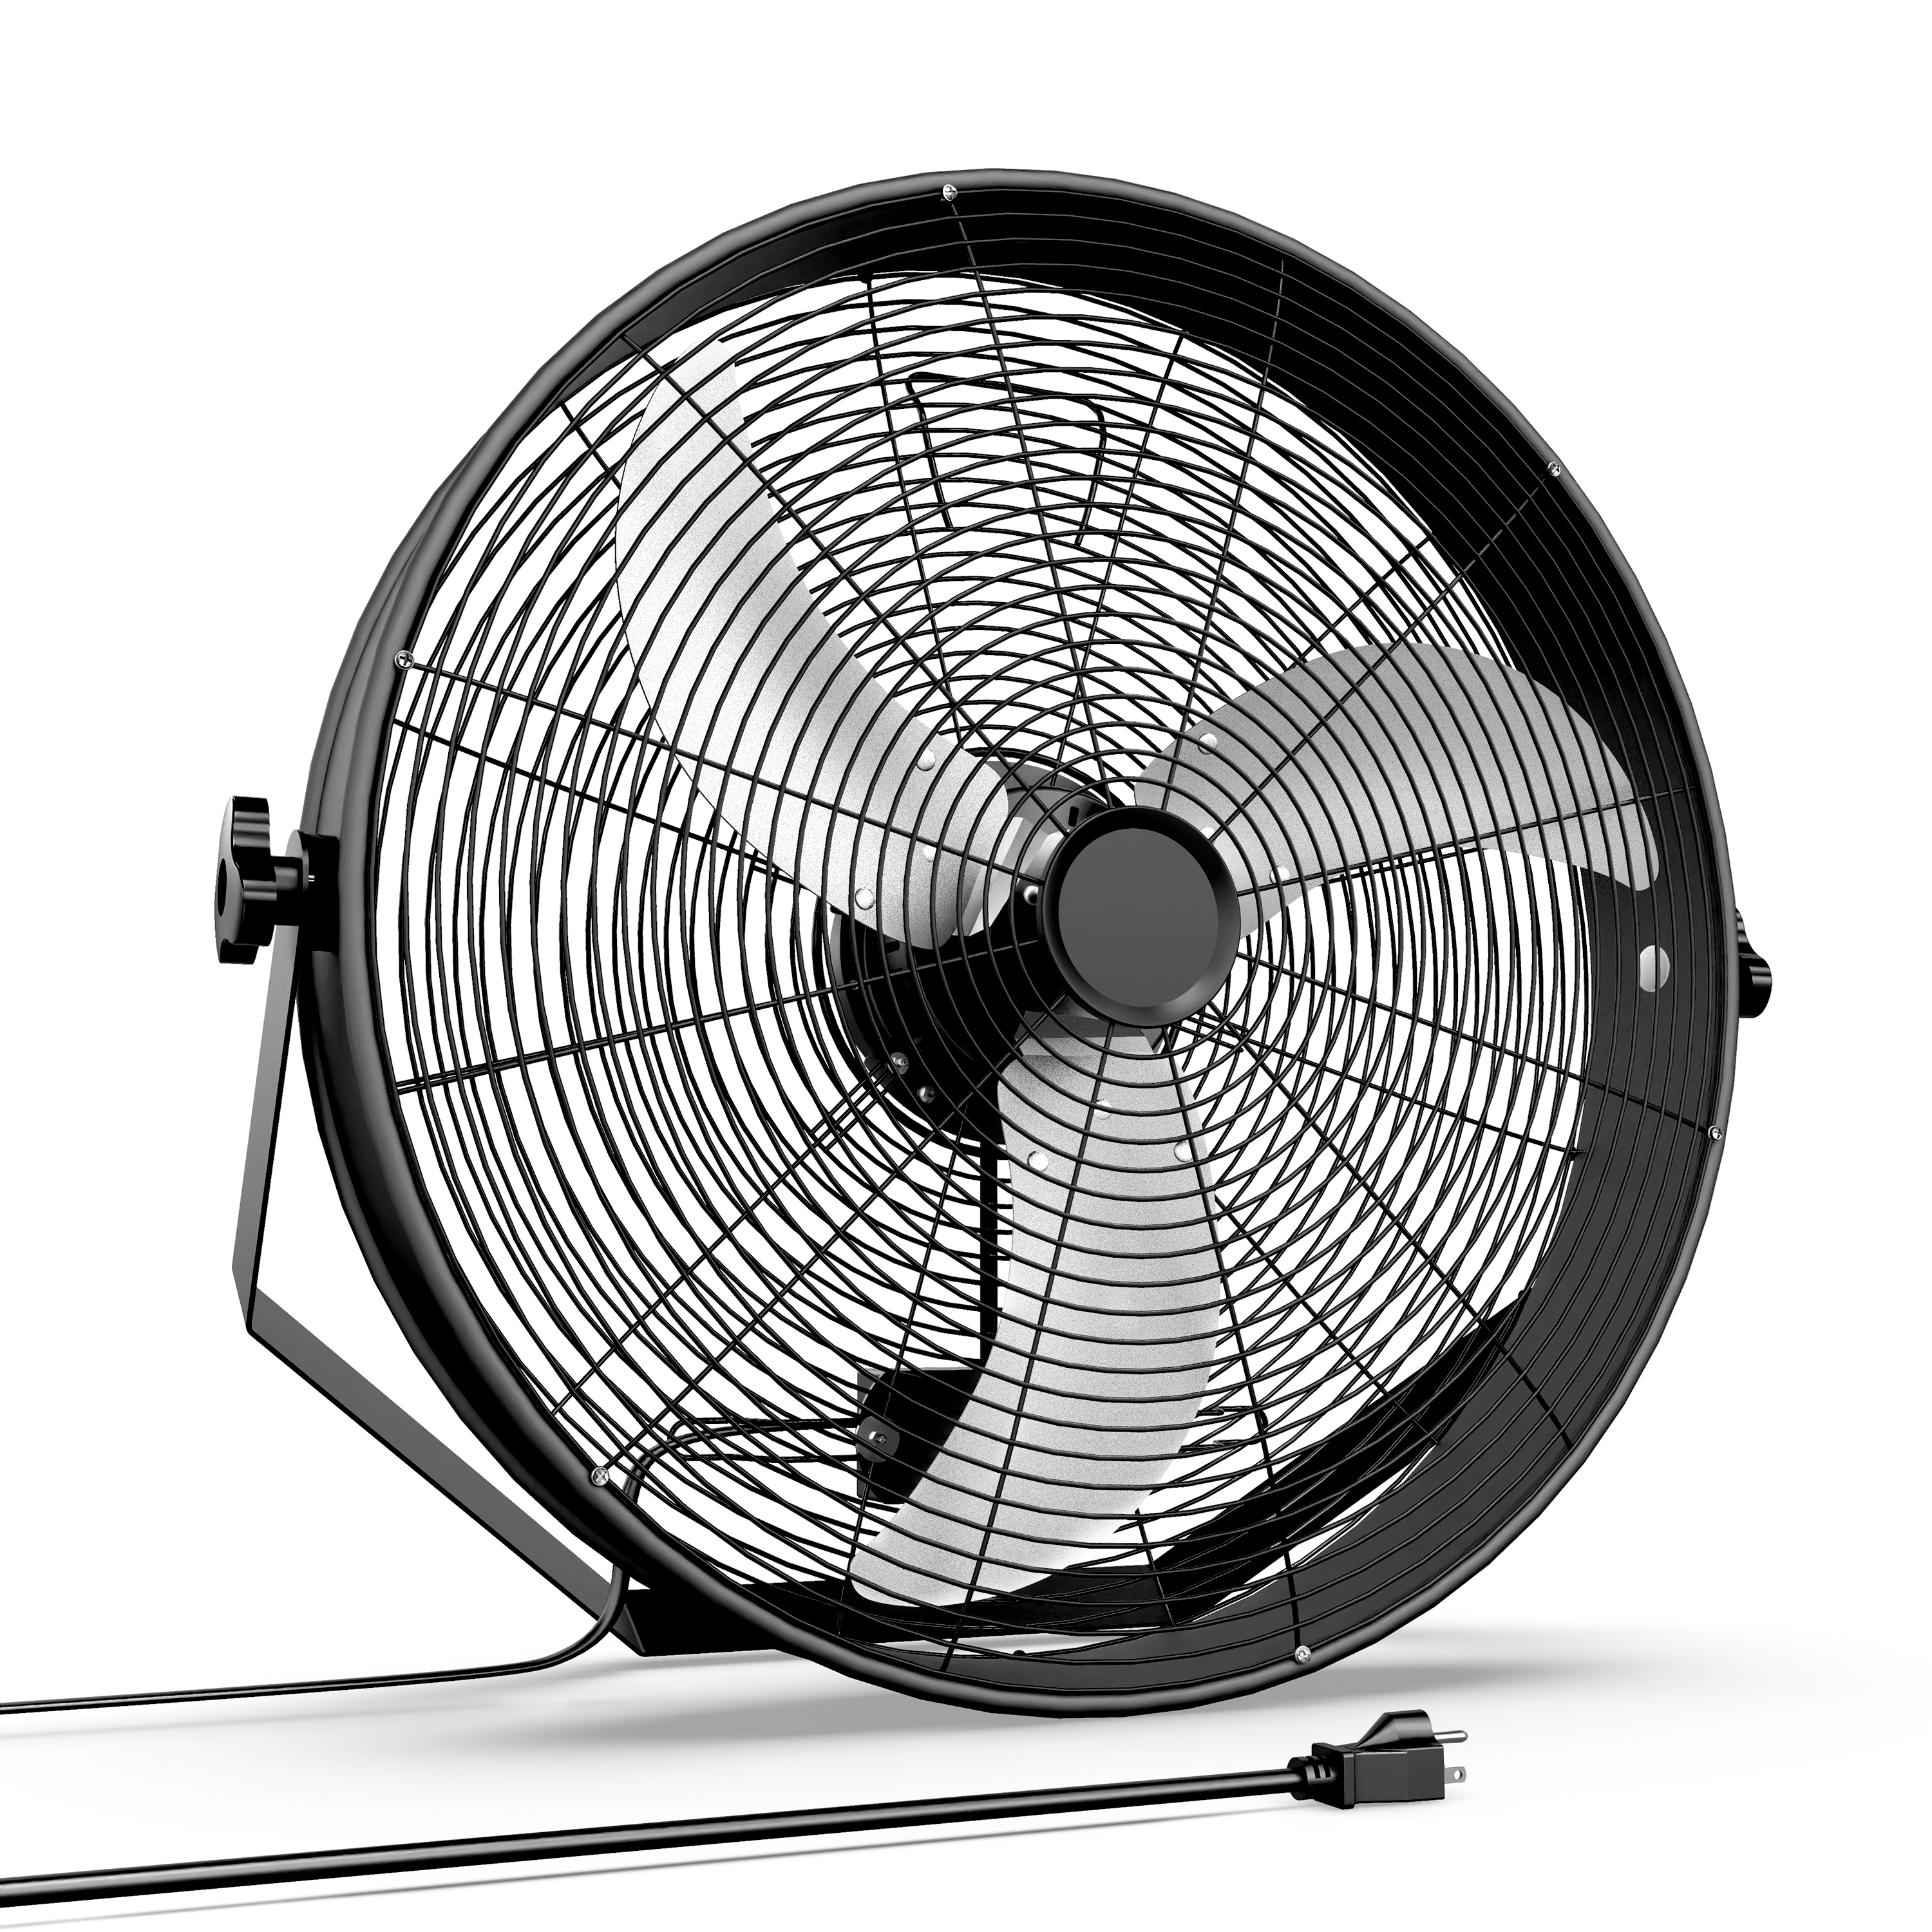 InfiniPower 20 Inch High Velocity Wall Mount Fan with Rack, 3 Speed Industrial/Commercial Metal Ventilation Fan